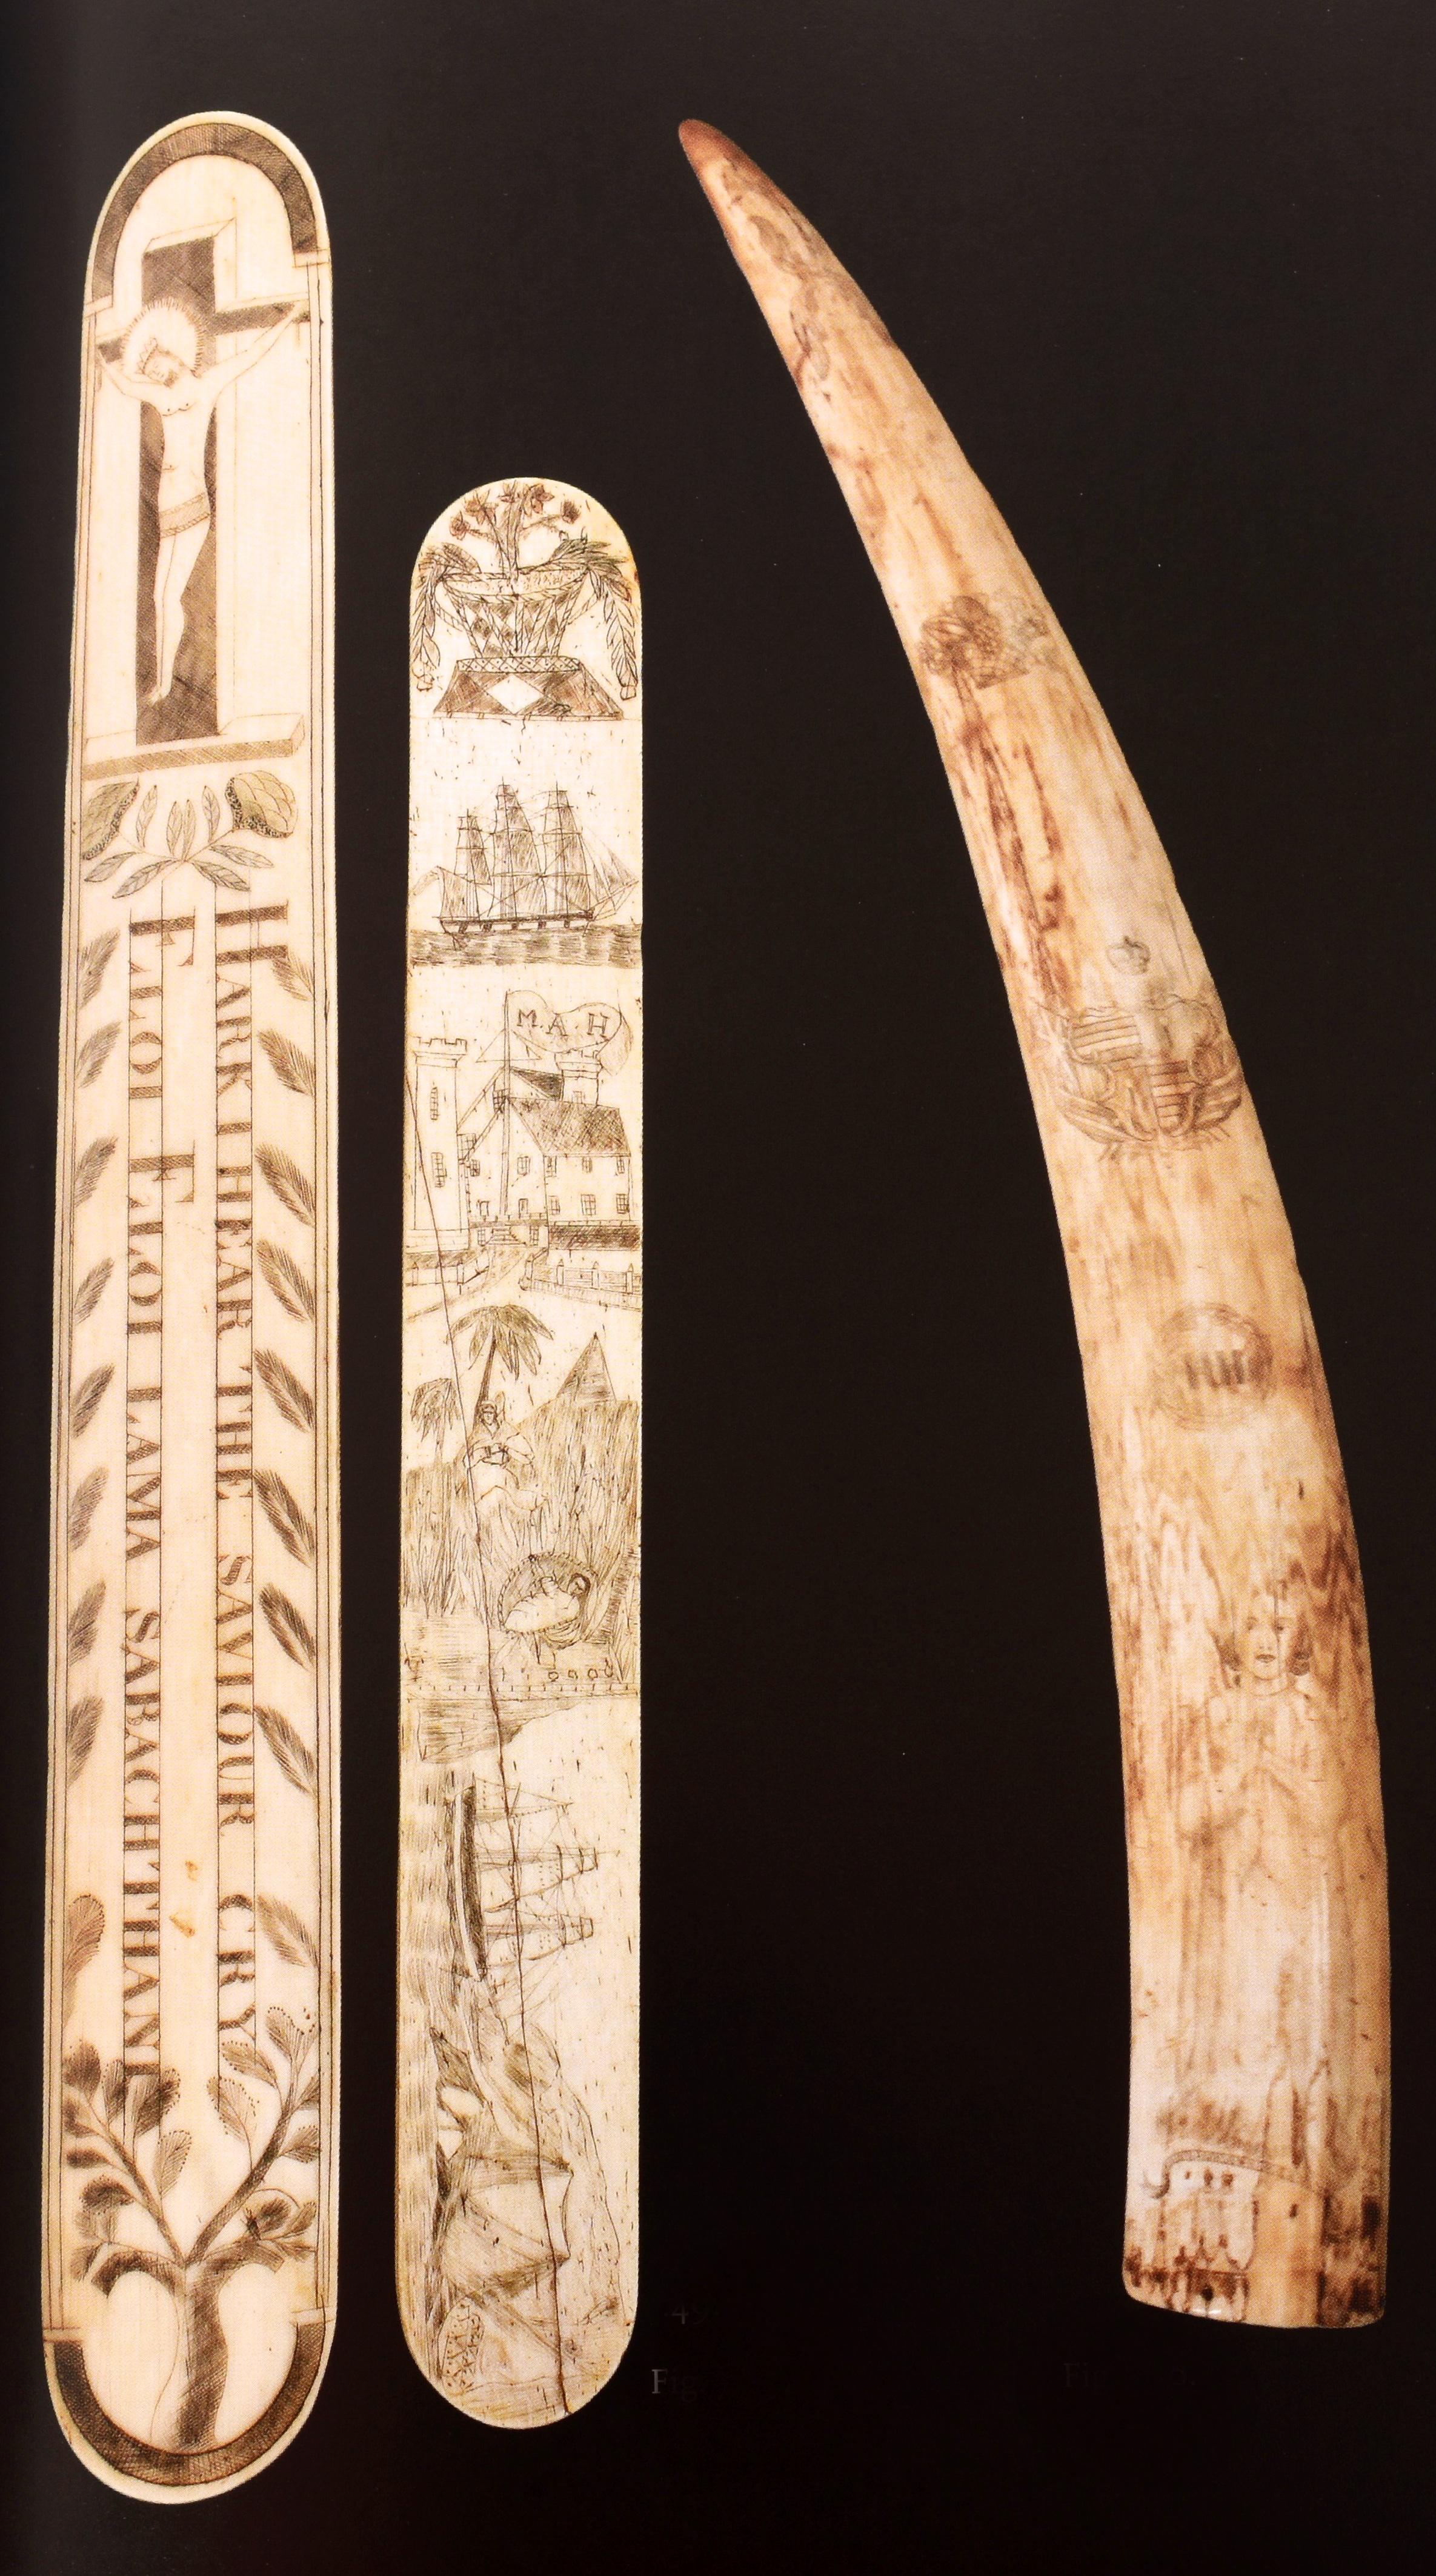 Ingenious Contrivances, Curiously Carved Scrimshaw, New Bedford Whaling Museum For Sale 11